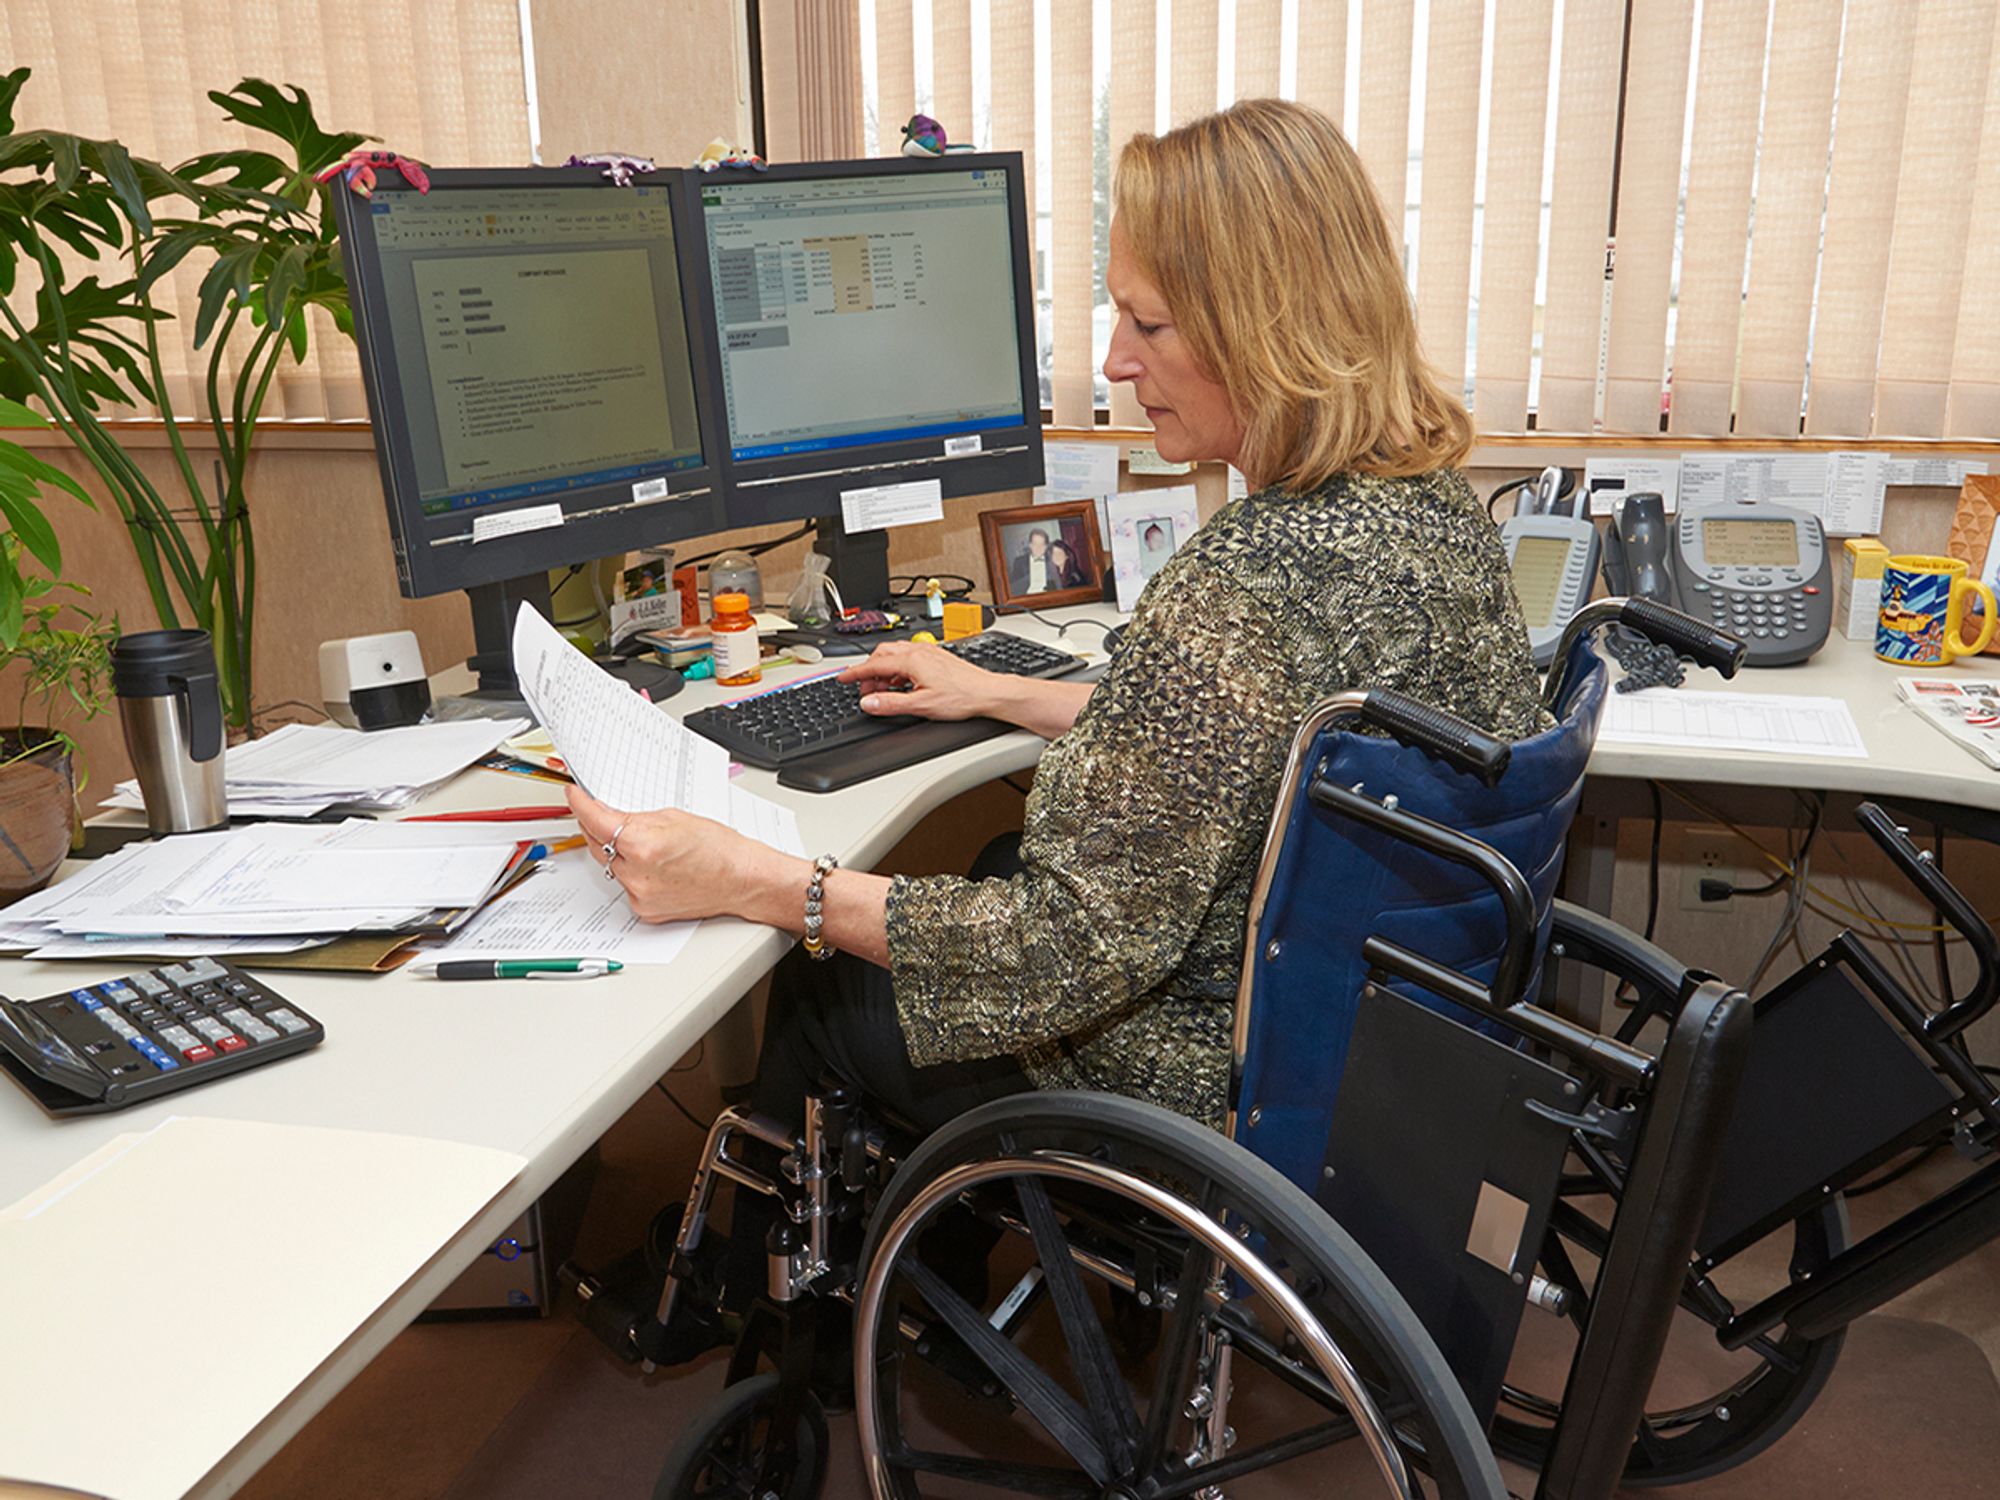 Americans with Disabilities Act (ADA) training